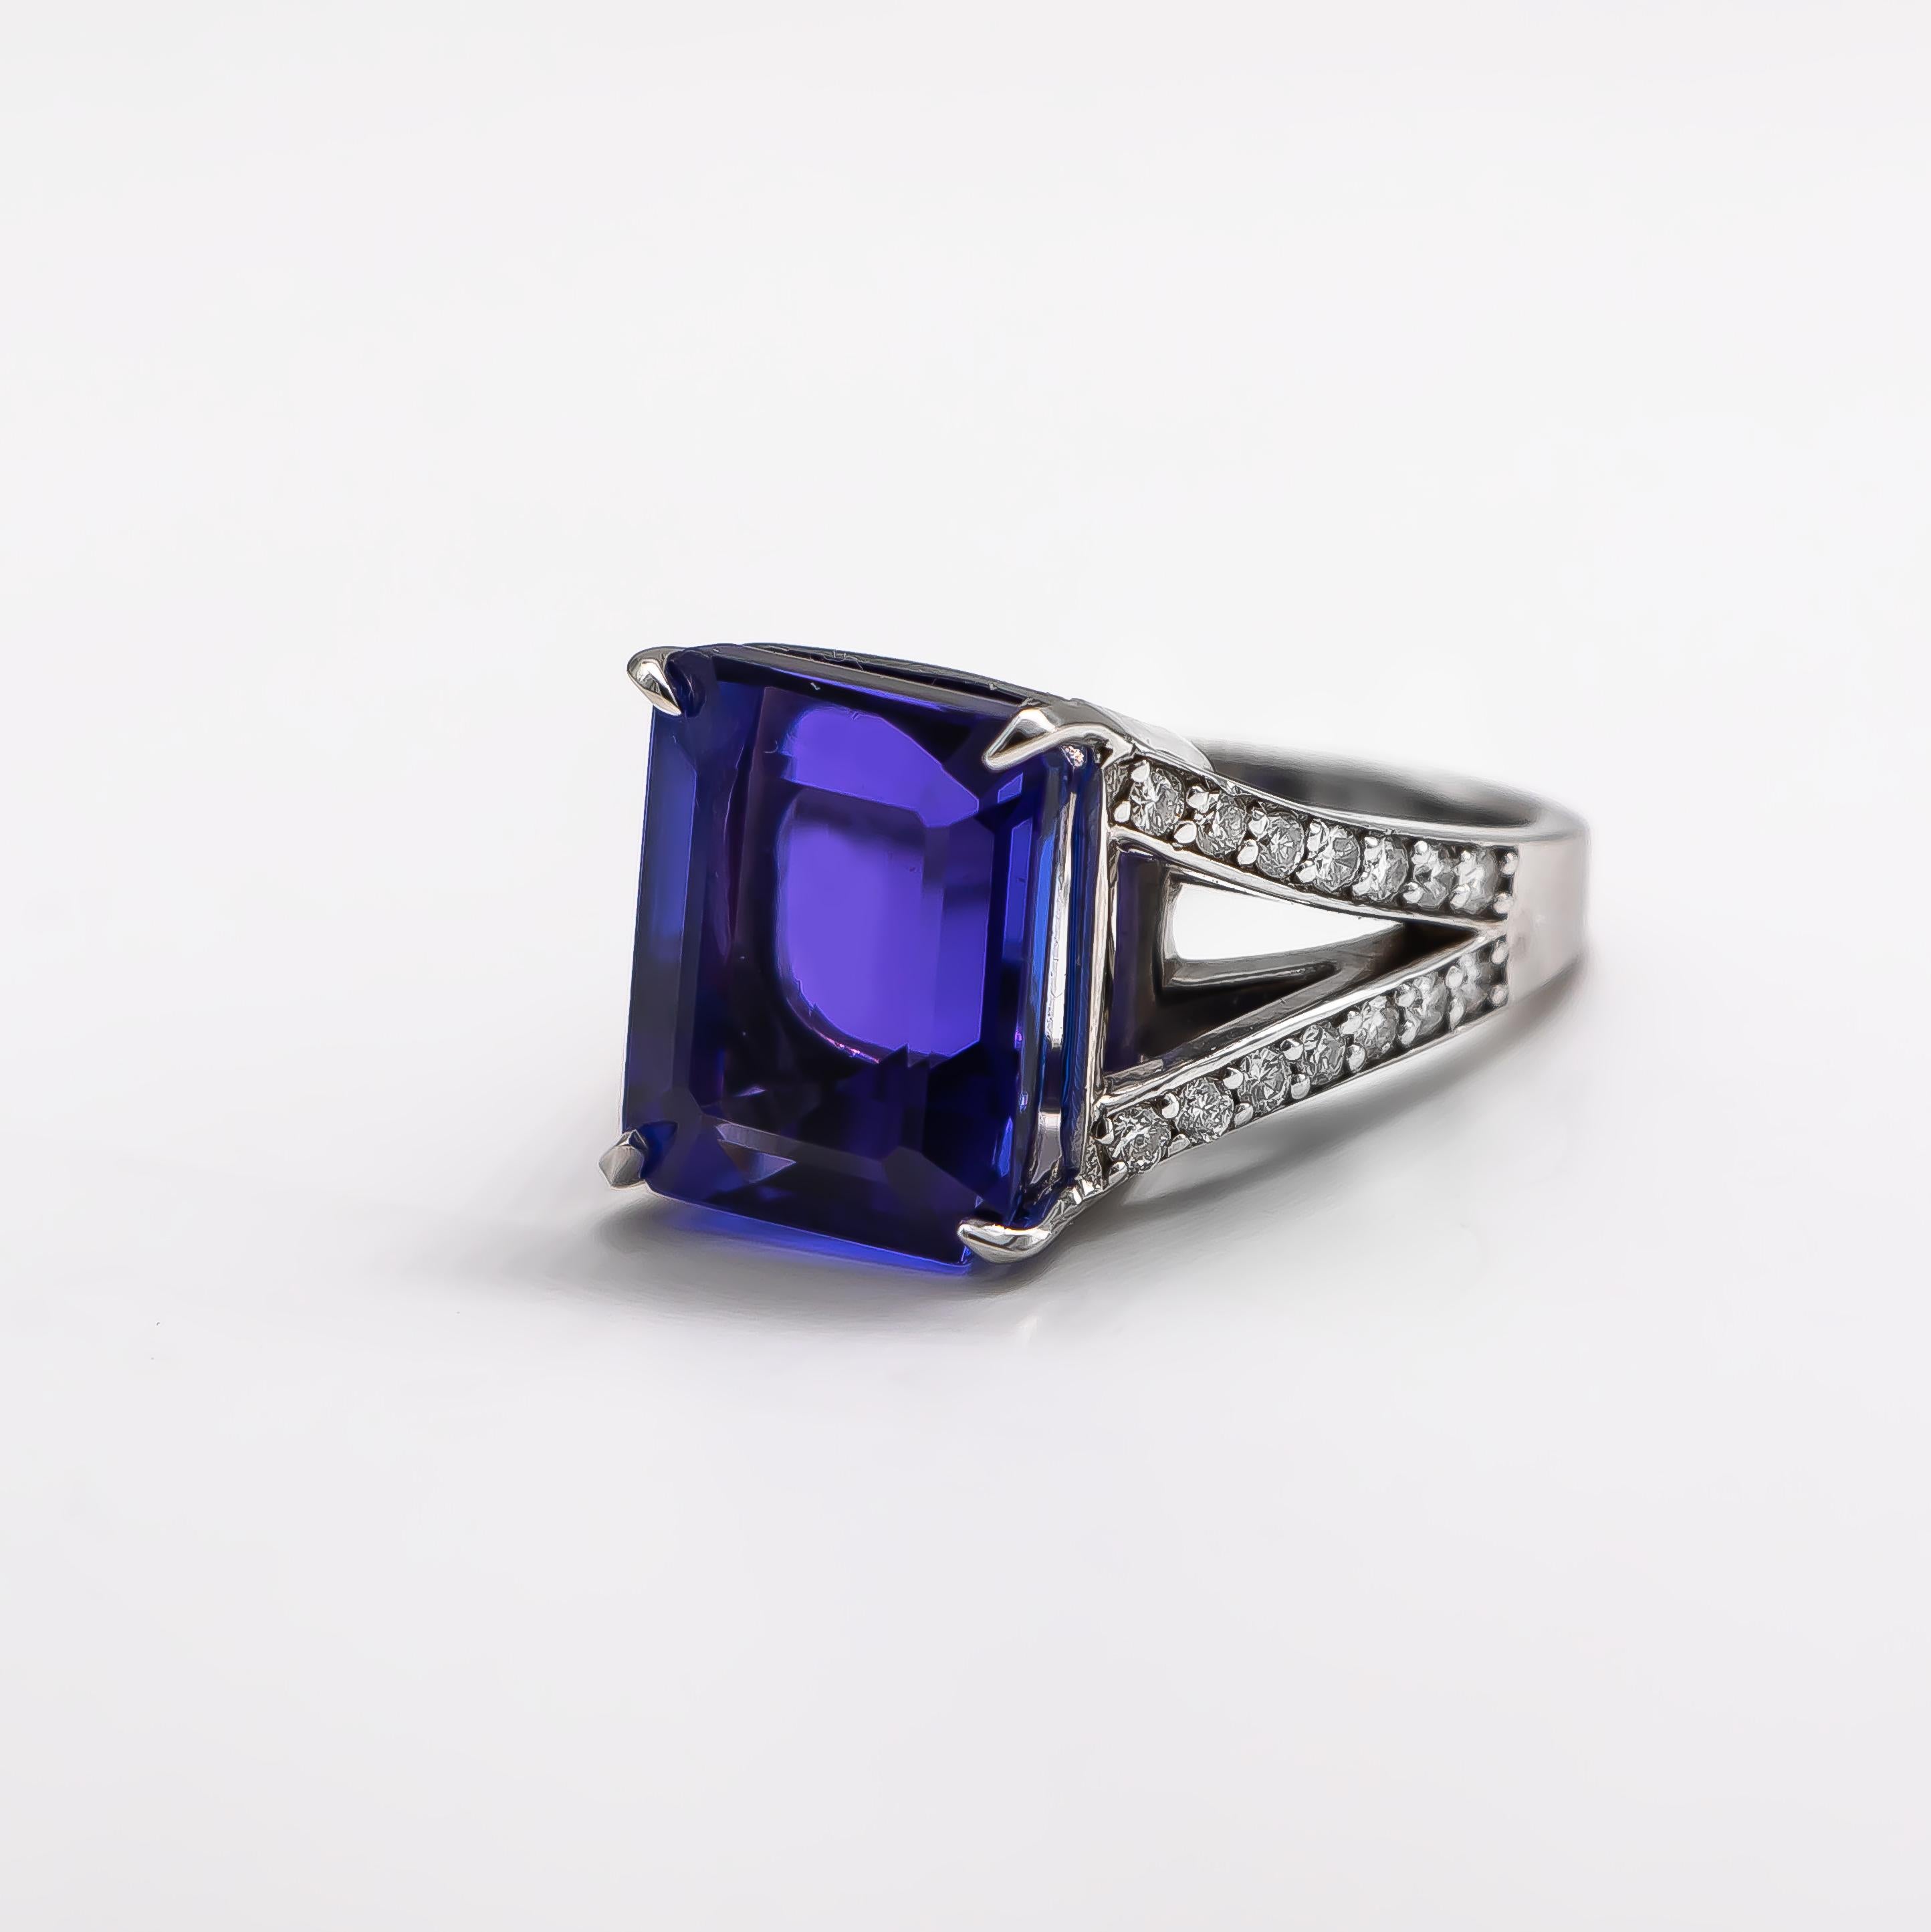 Very Fine 17.67 Carat Tanzanite Ring Encrusted with 1.46 Carat Diamonds In Excellent Condition For Sale In Carlsbad, CA